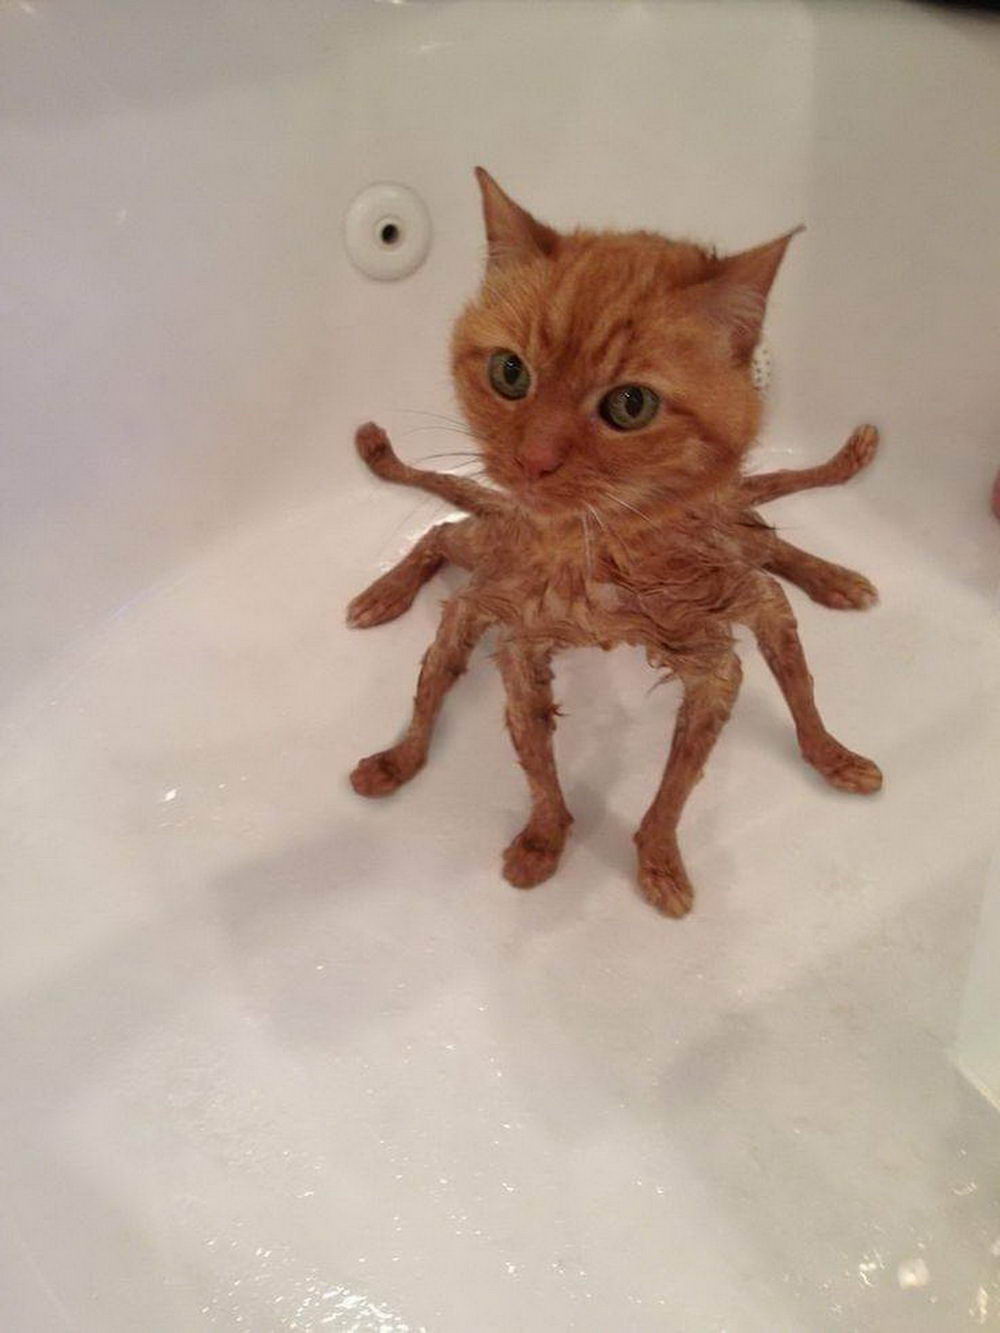 remarkable image of a spider cat in a bathtub